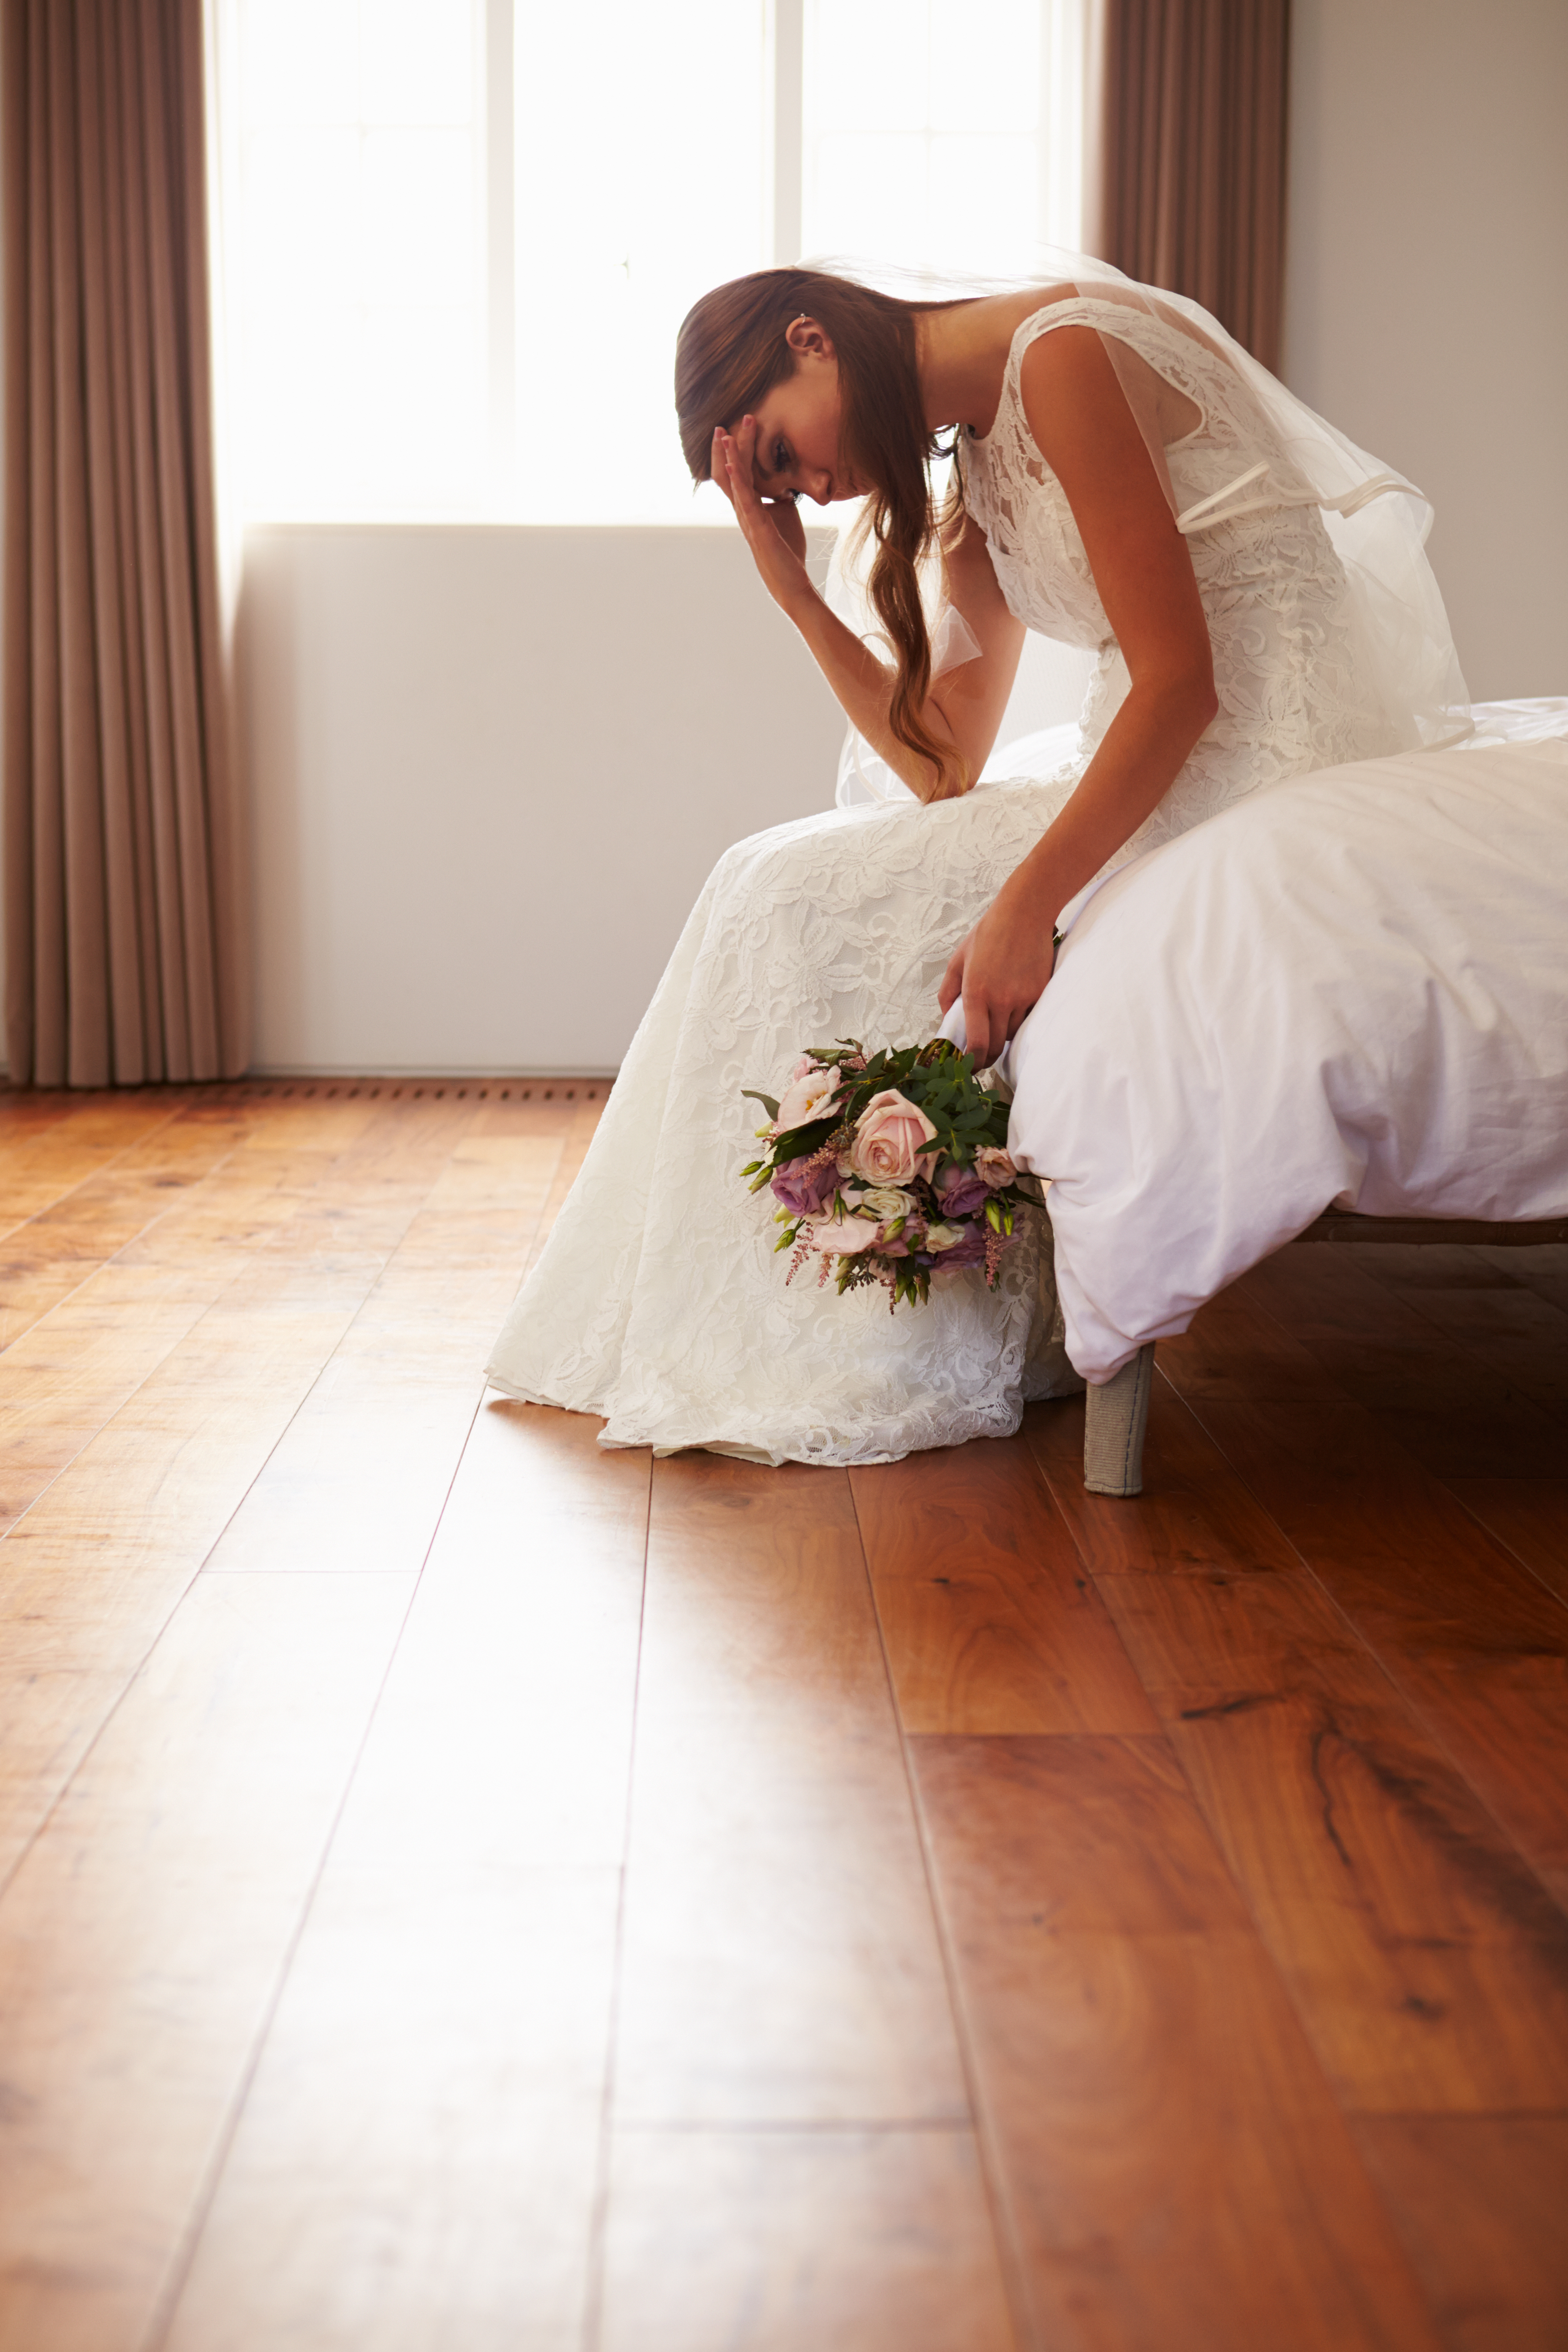 A distressed bride in the bedroom | Source: Shutterstock